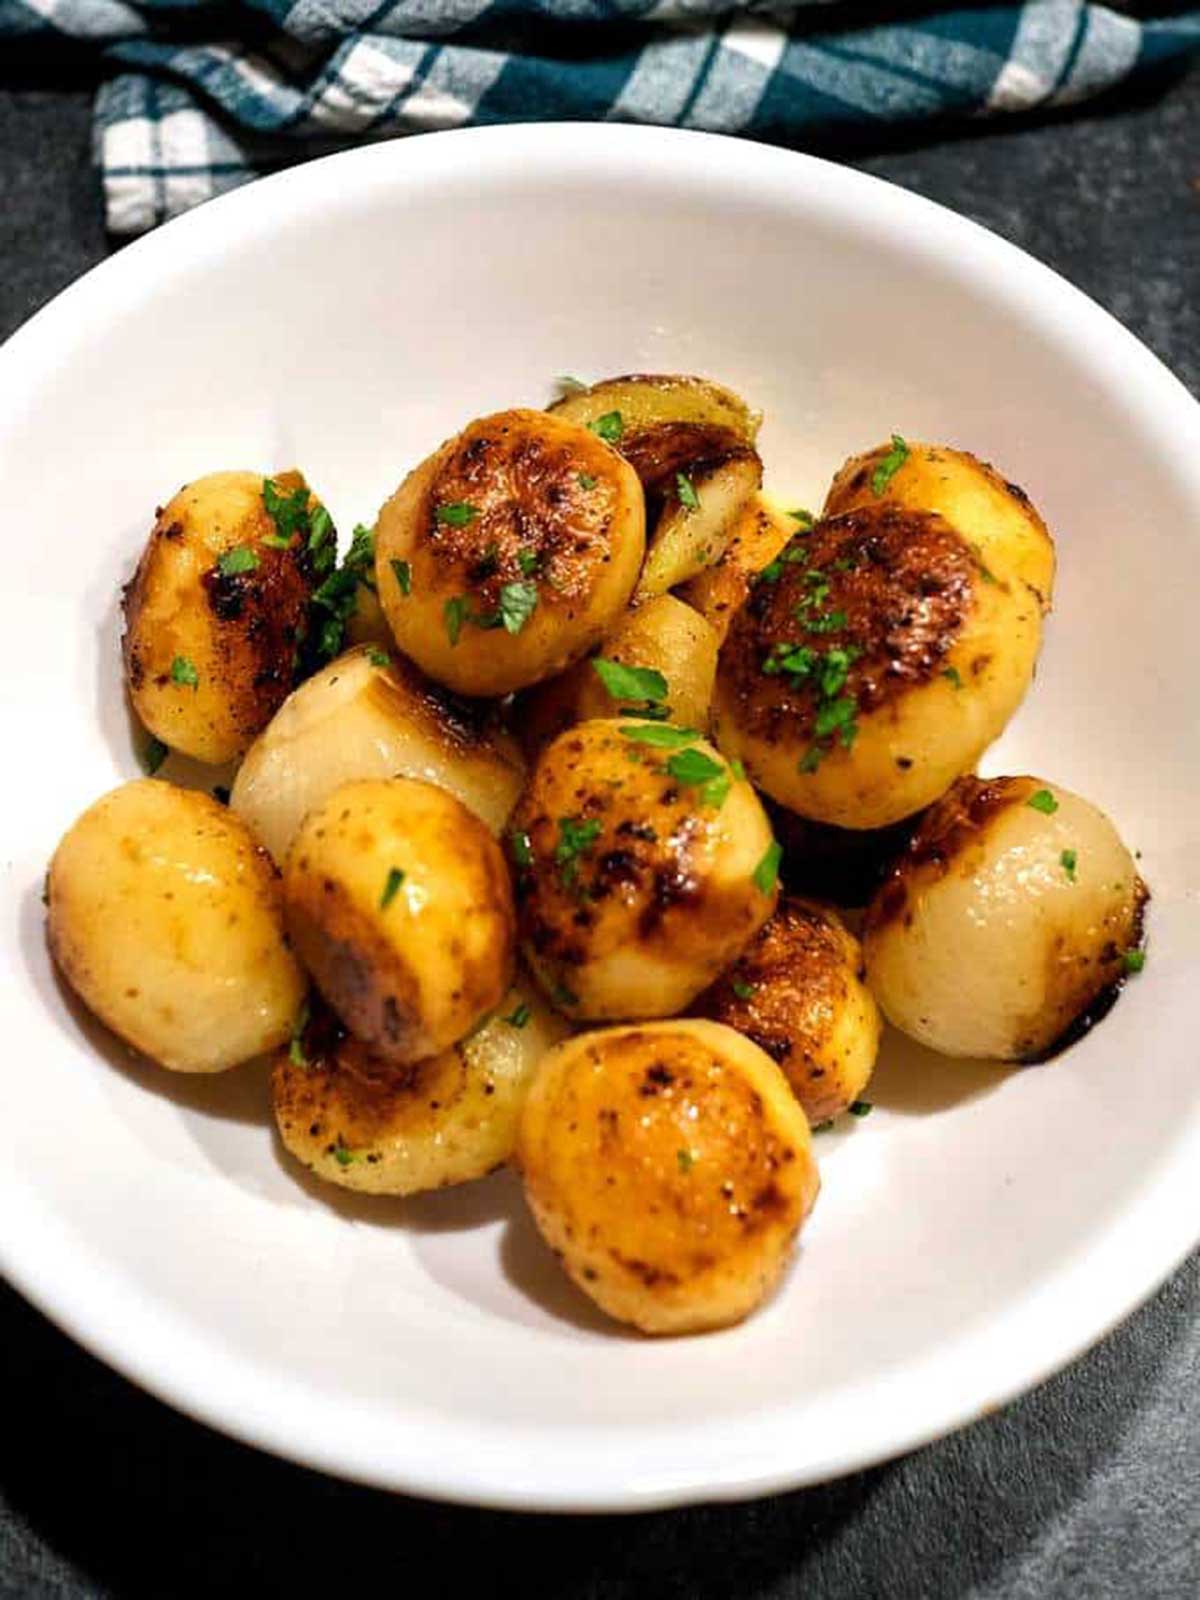 Pan-roasted potatoes and onions.